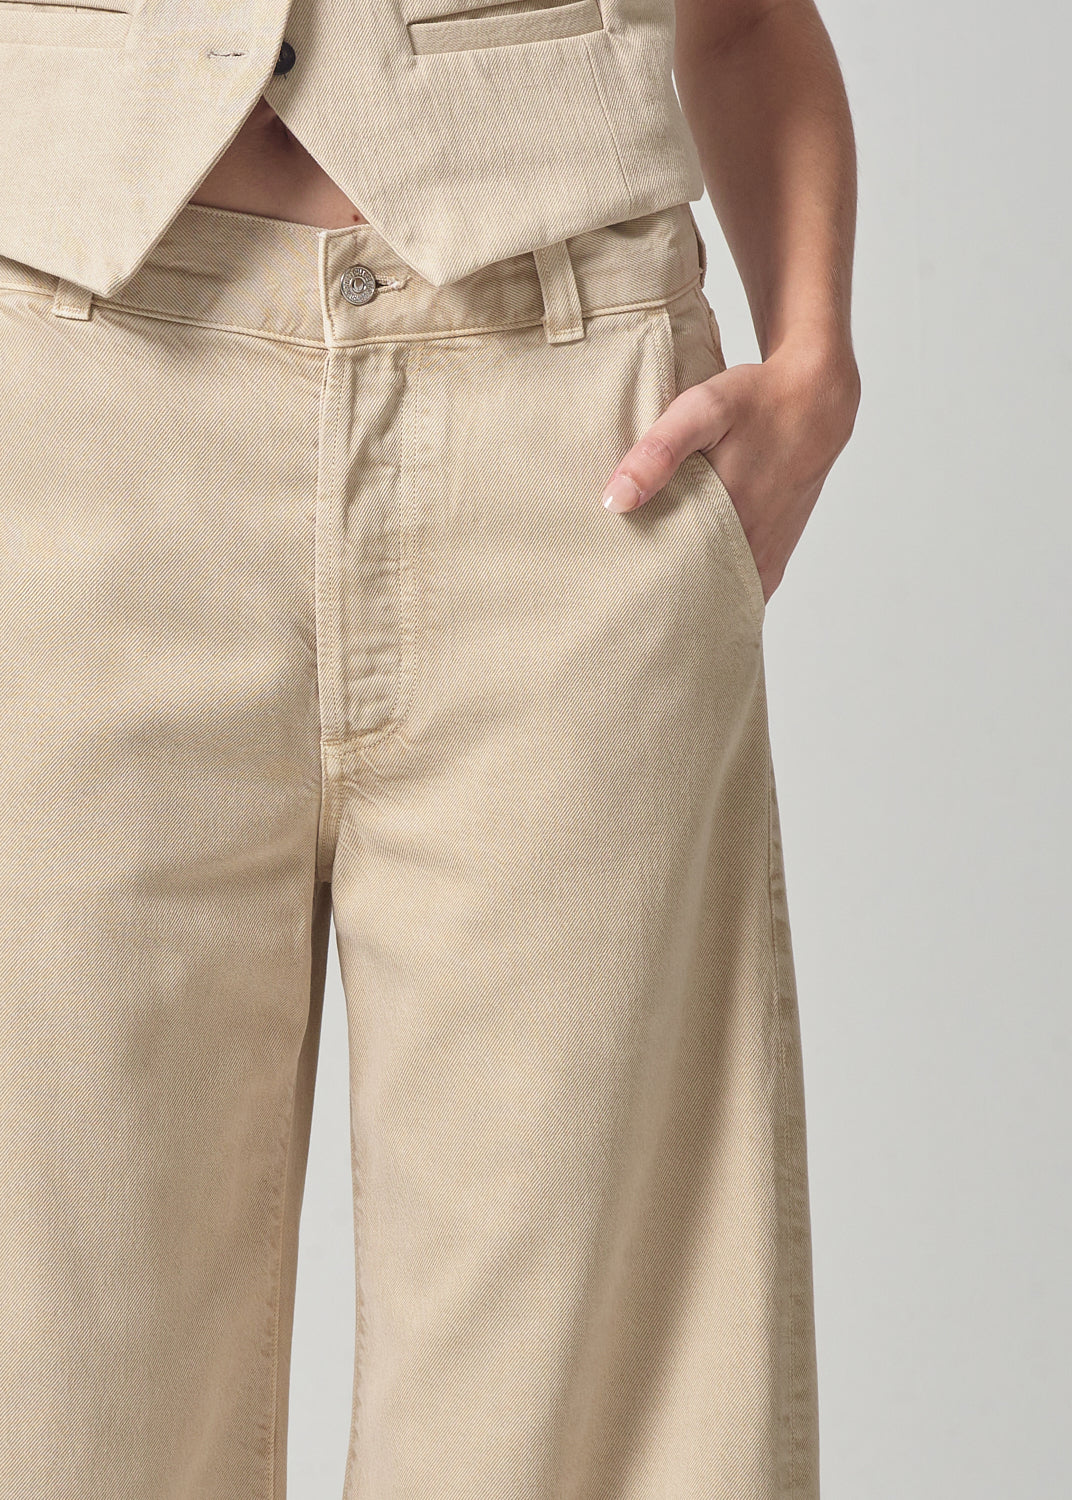 Citizens Of Humanity Beverly Trouser